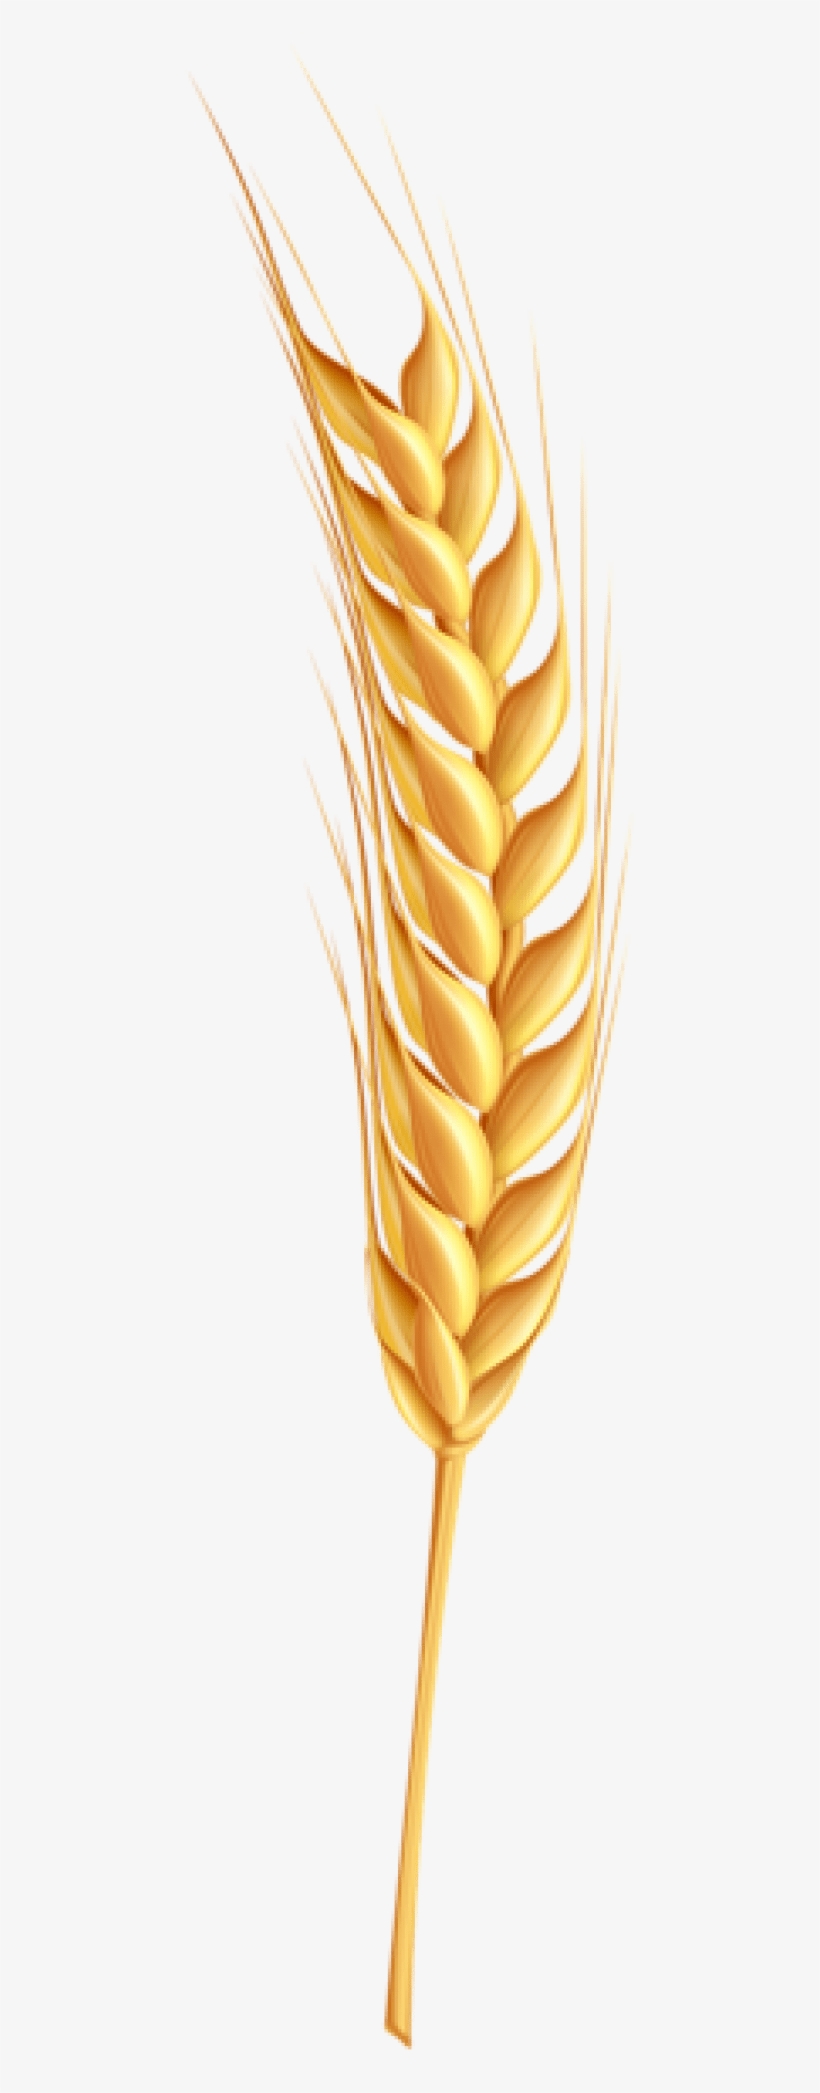 Free Png Wheat Png Images Transparent - Coeliac Disease: What You Need To Know, transparent png #4303235